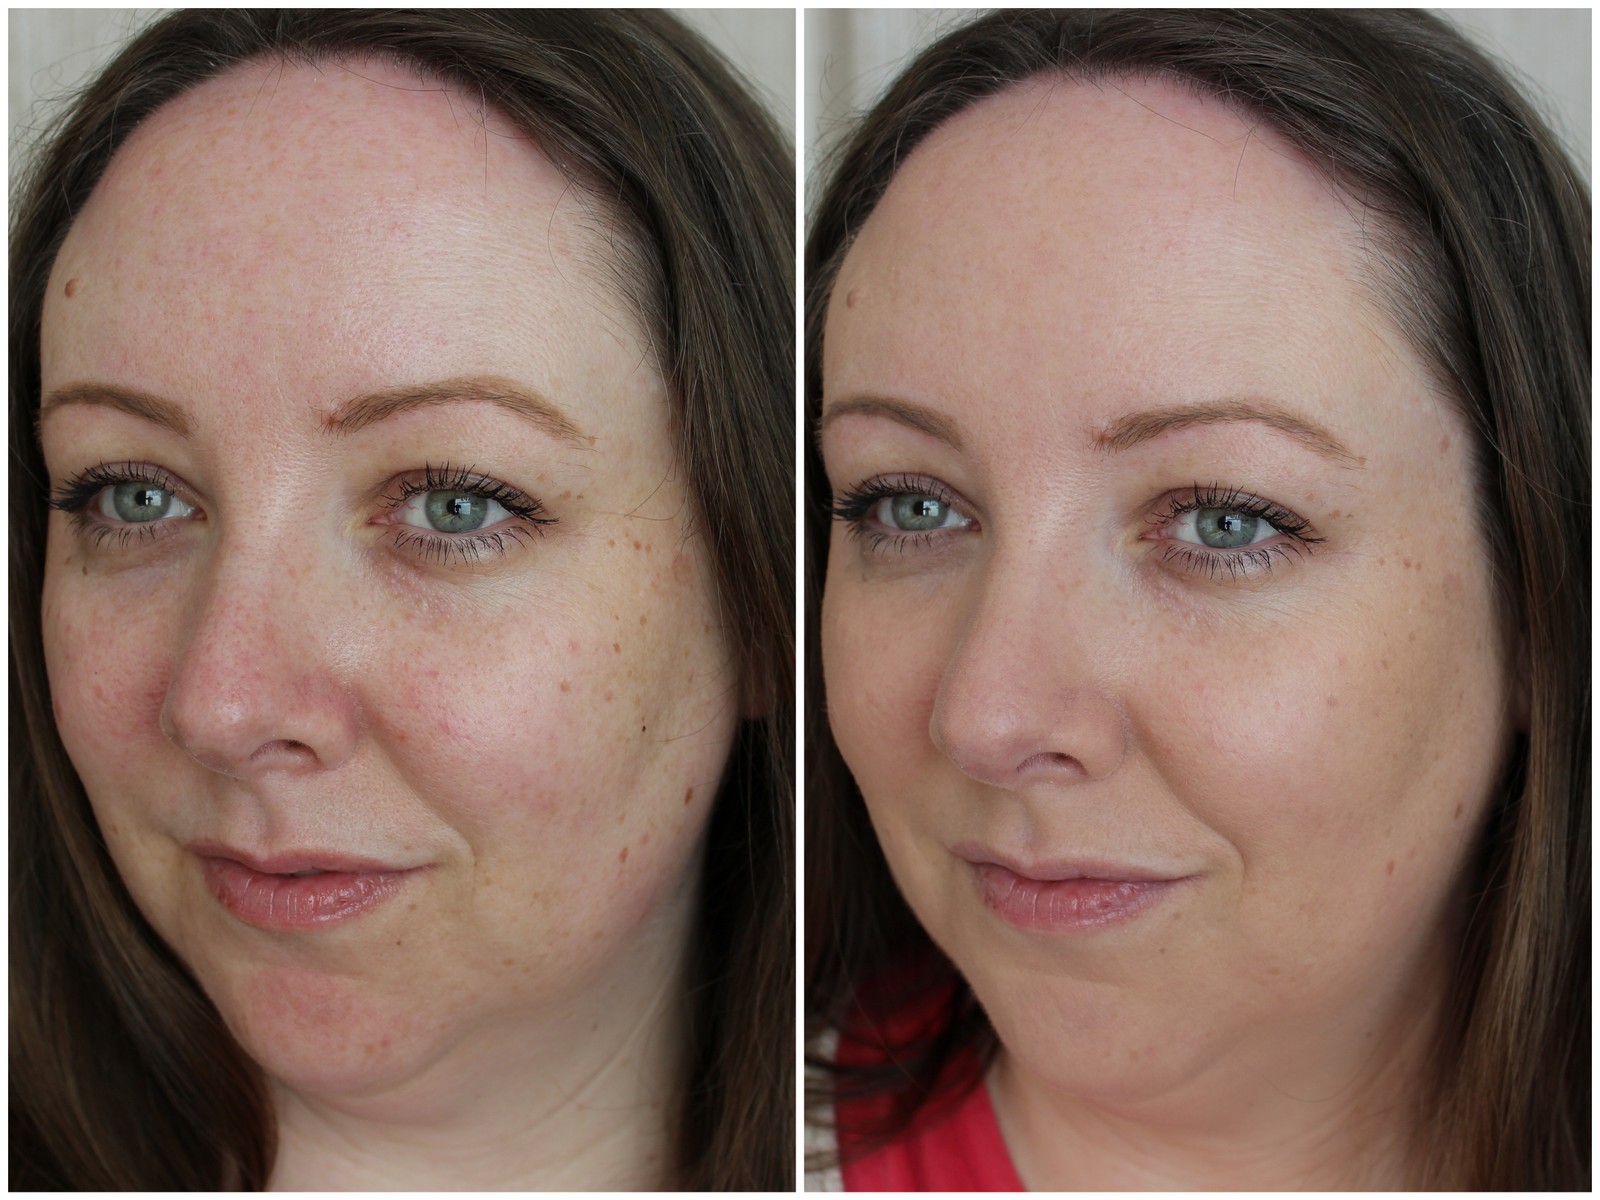 Clarins BB Skin Detox Fluid review, before & after photos! - Lovely